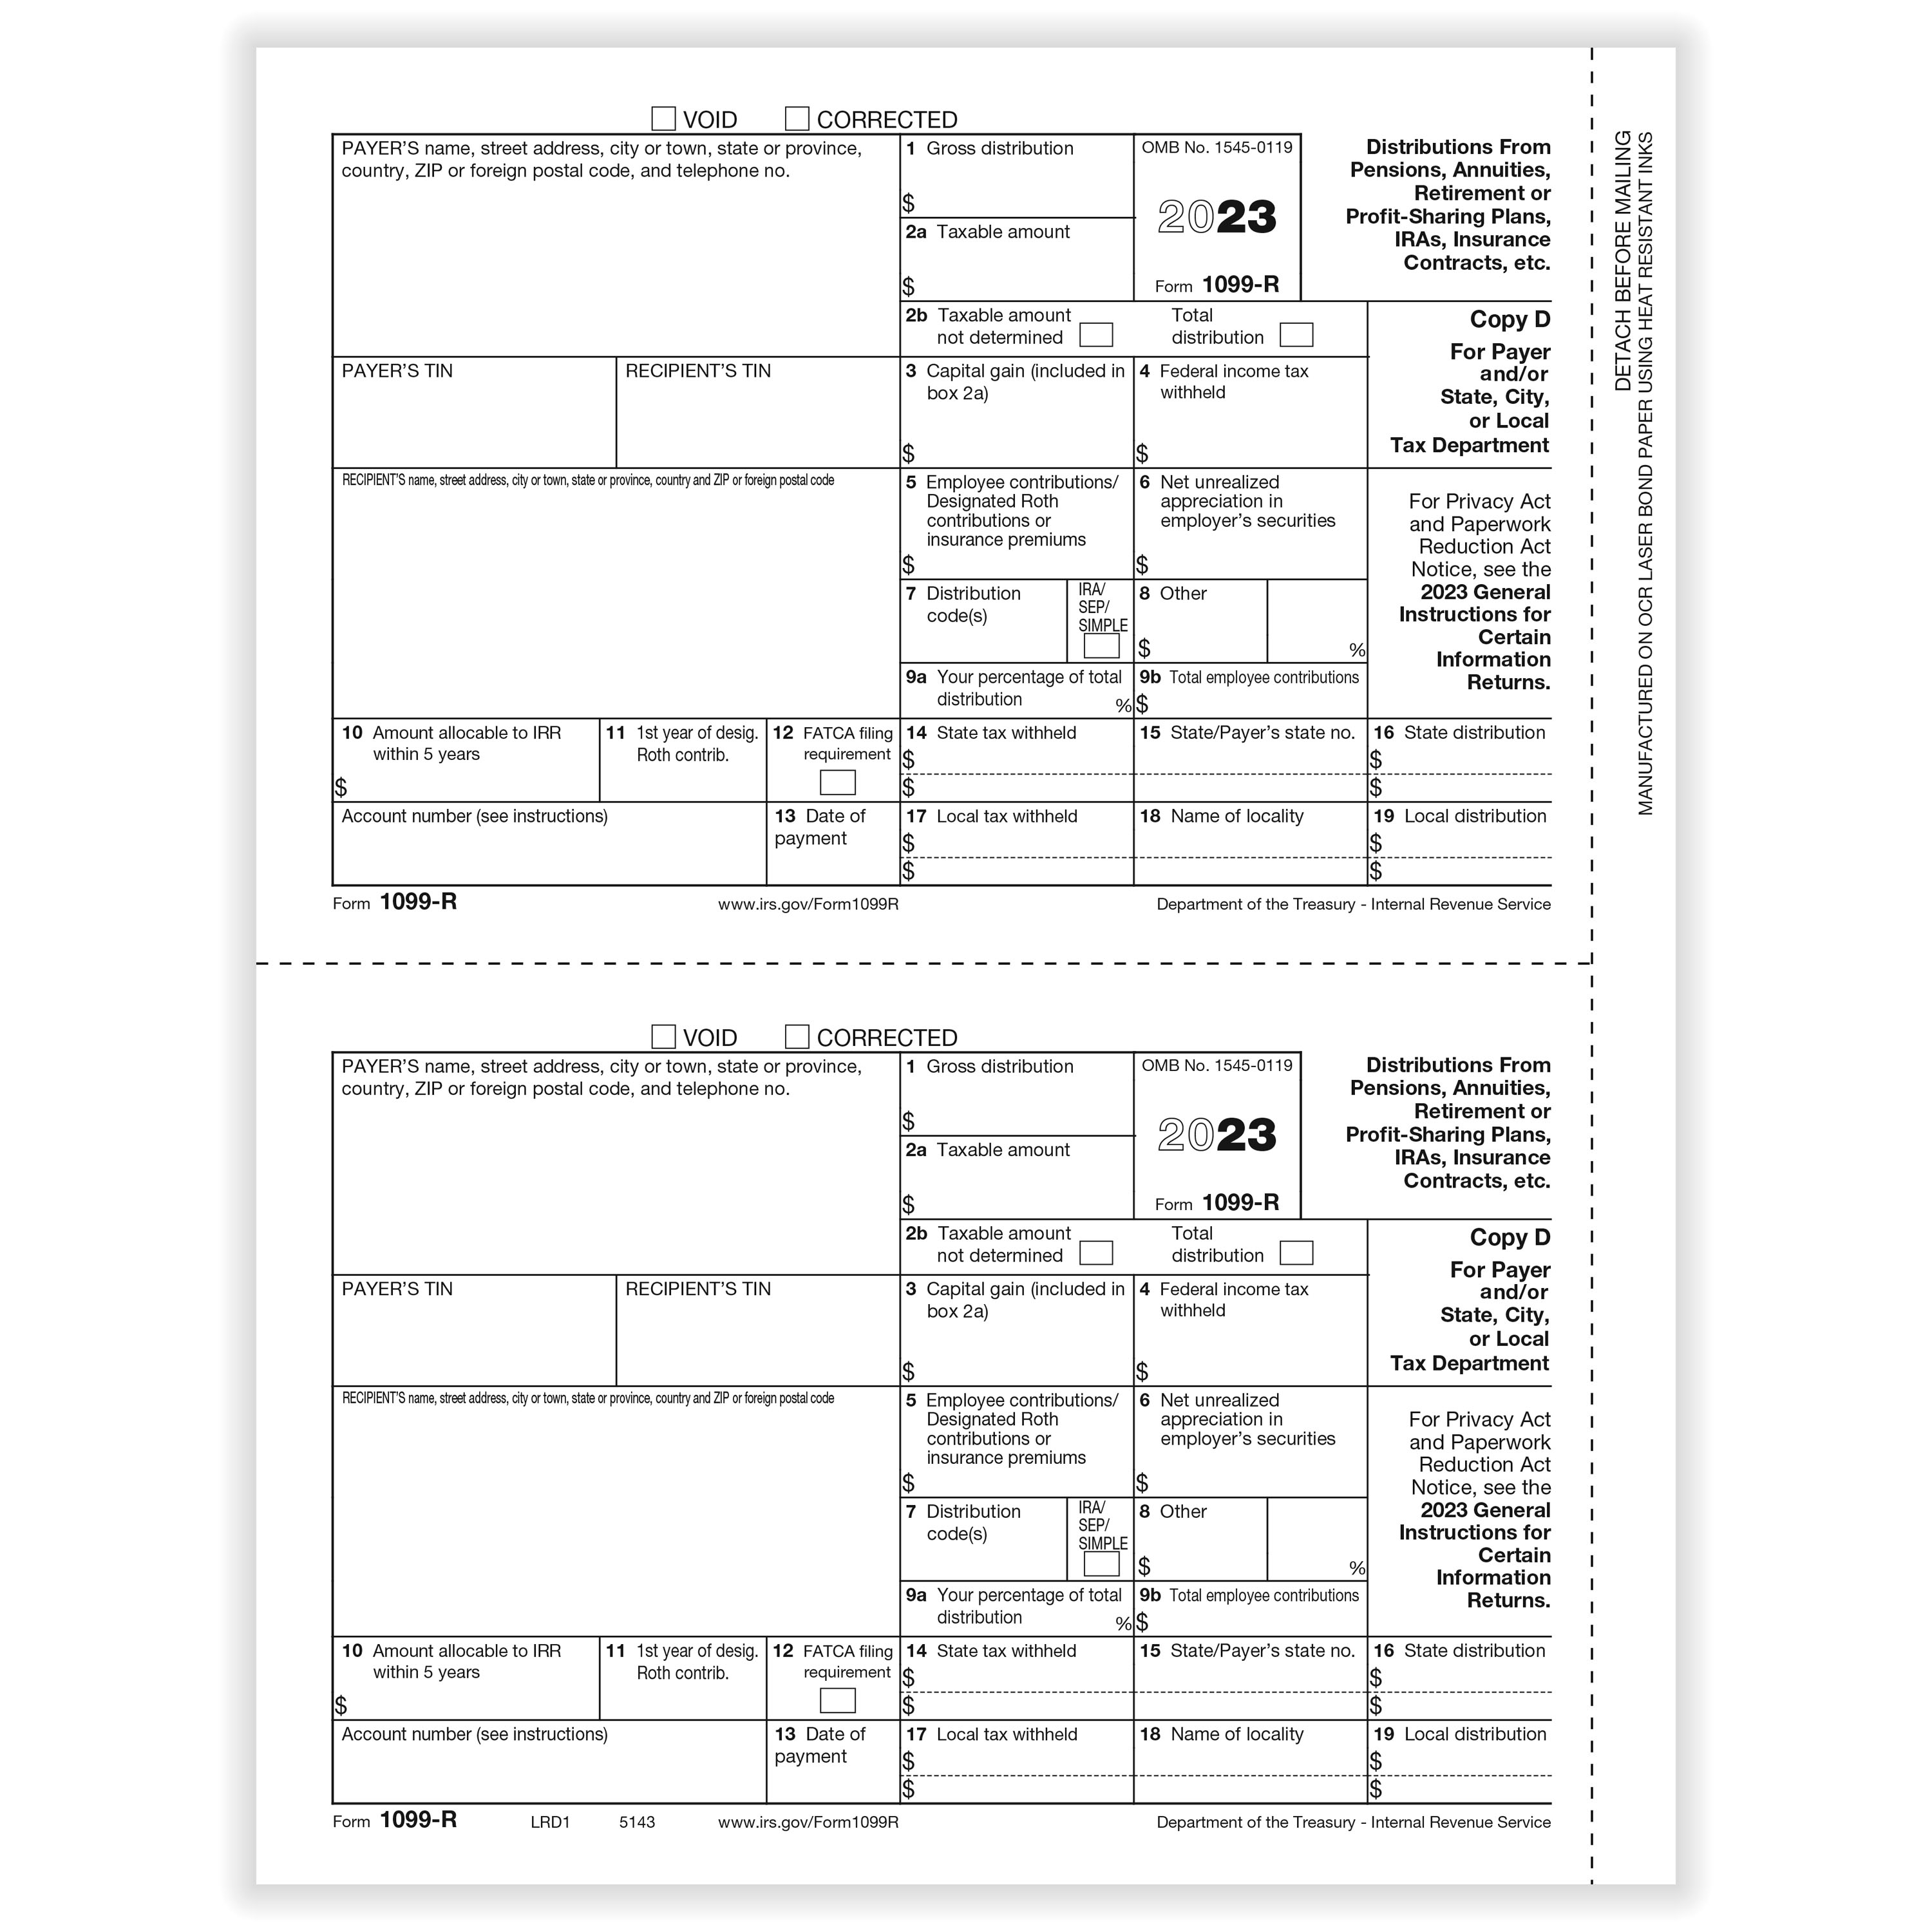 1099-R Payer Copy D and/or State, City or Local Copy Cut Sheet